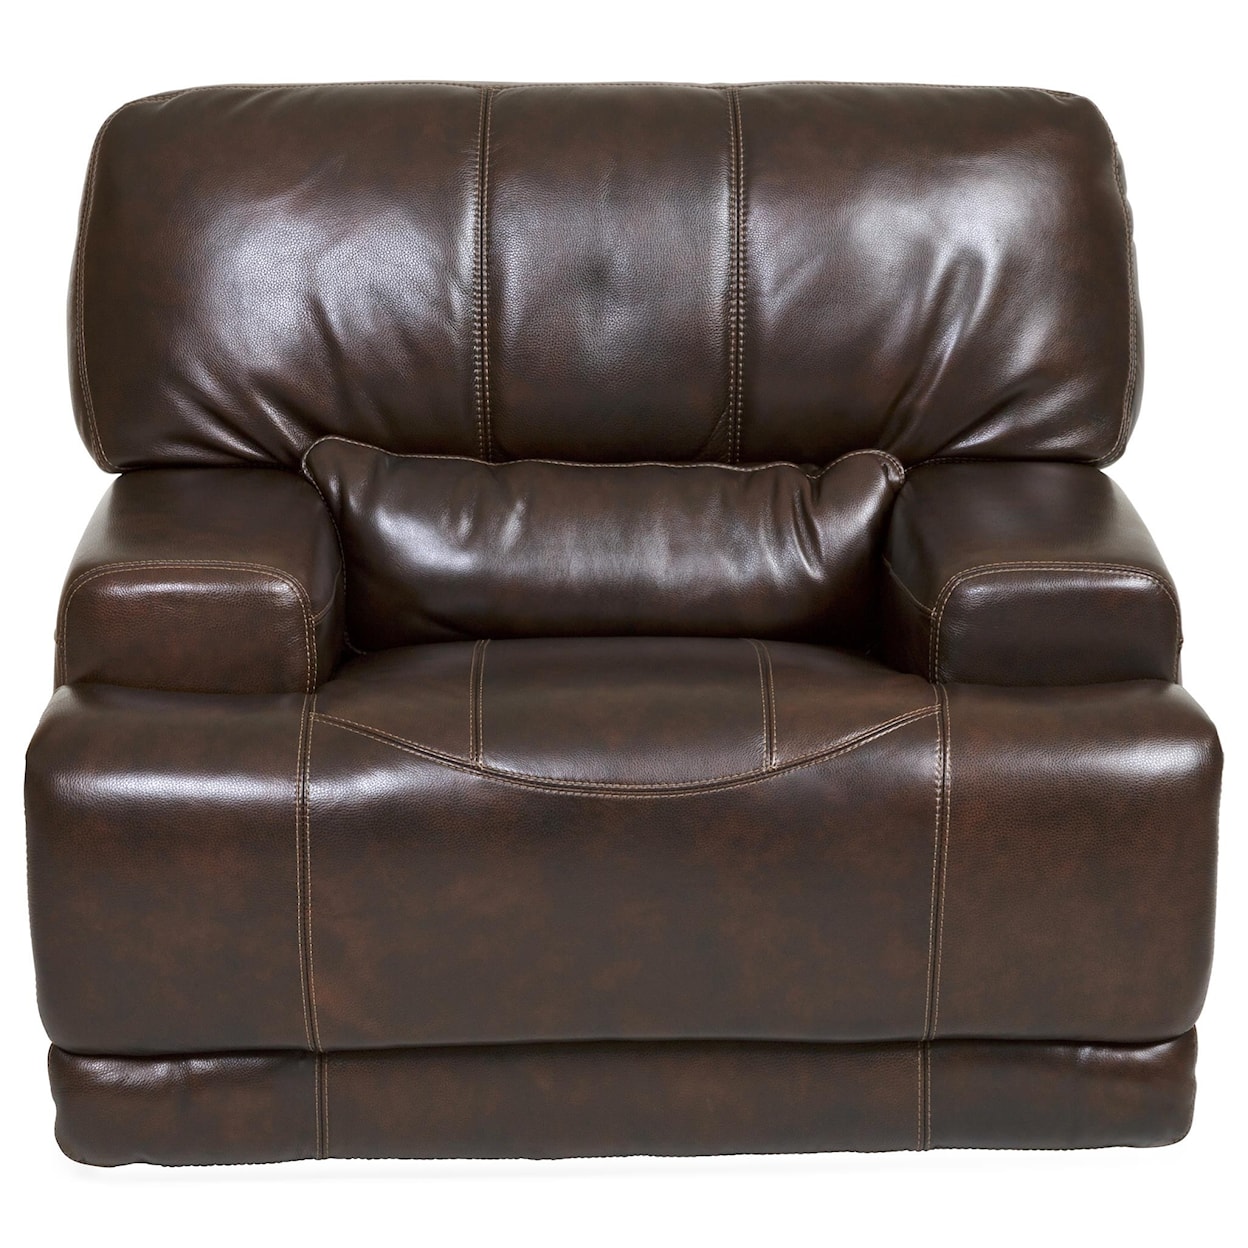 Simon Li Stampede Leather Reclining Lounge Chair